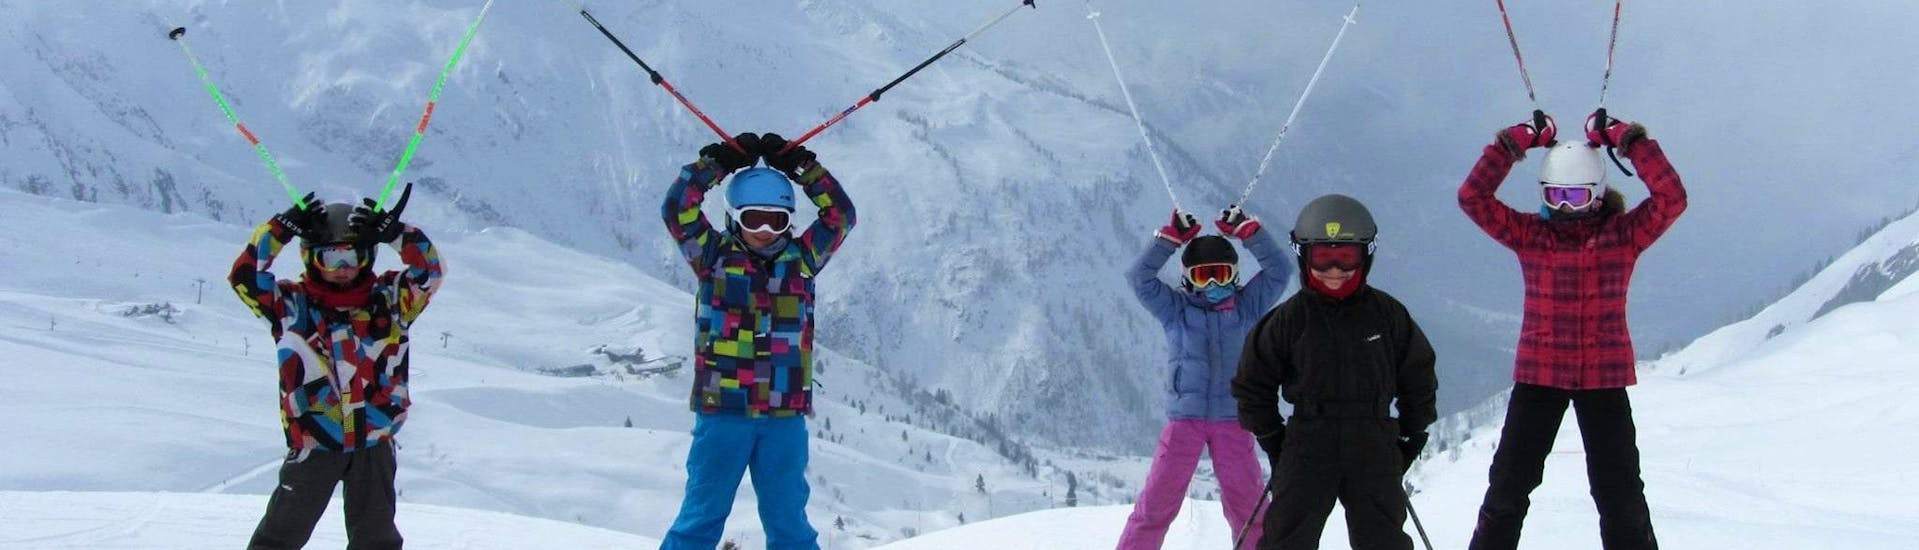 Kids are standing at the top of the mountain with their ski poles up in the air during their Kids Ski Lessons (5-12 years) in Chamonix/Savoy with the ski school ESF Chamonix.